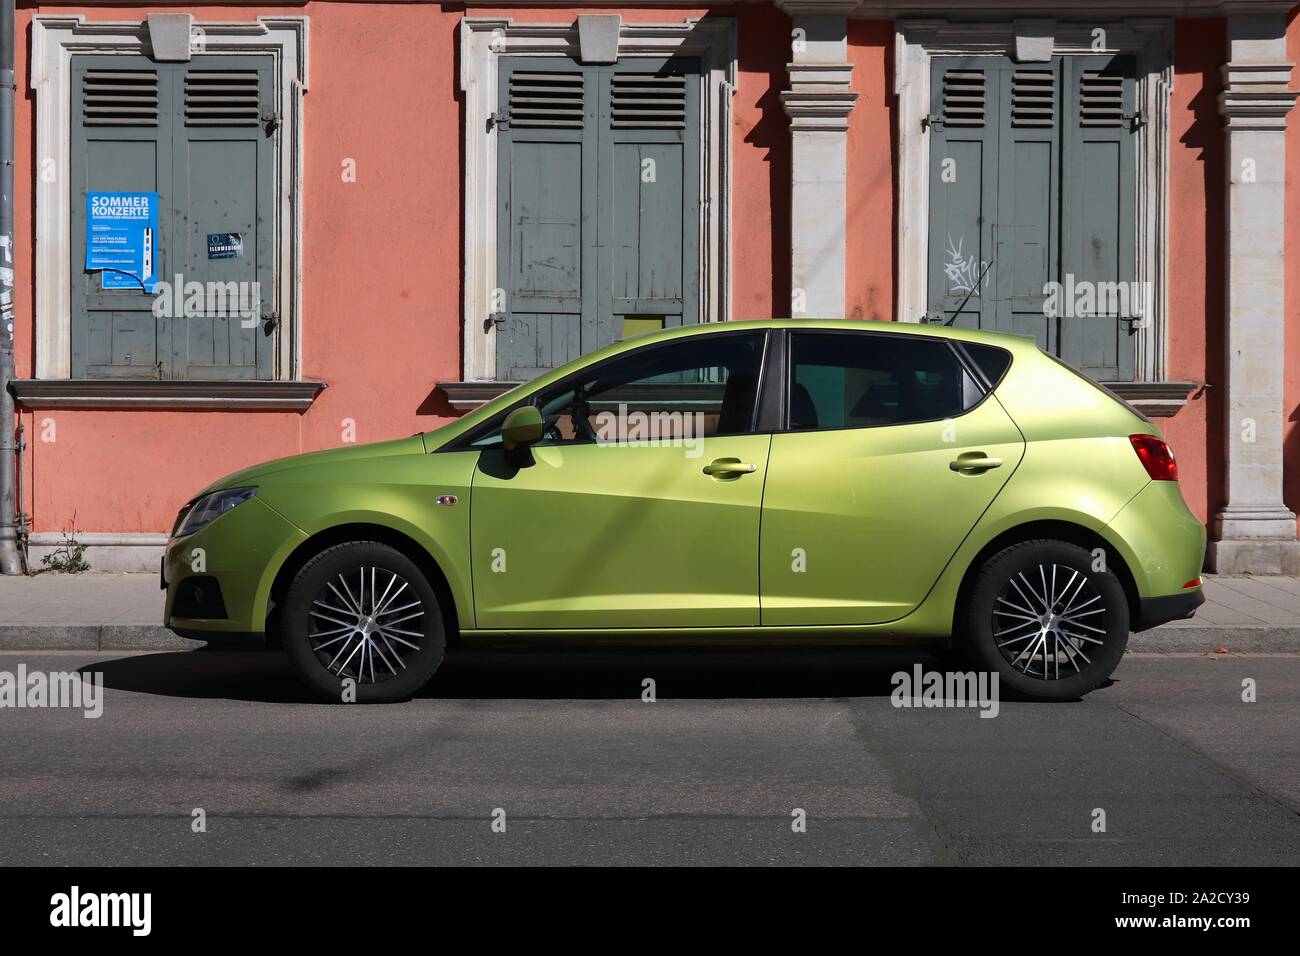 ERLANGEN, GERMANY - MAY 6, 2018: Green Seat Ibiza compact hatchback car parked in Germany. The car was designed by Belgian car designer Luc Donckerwol Stock Photo